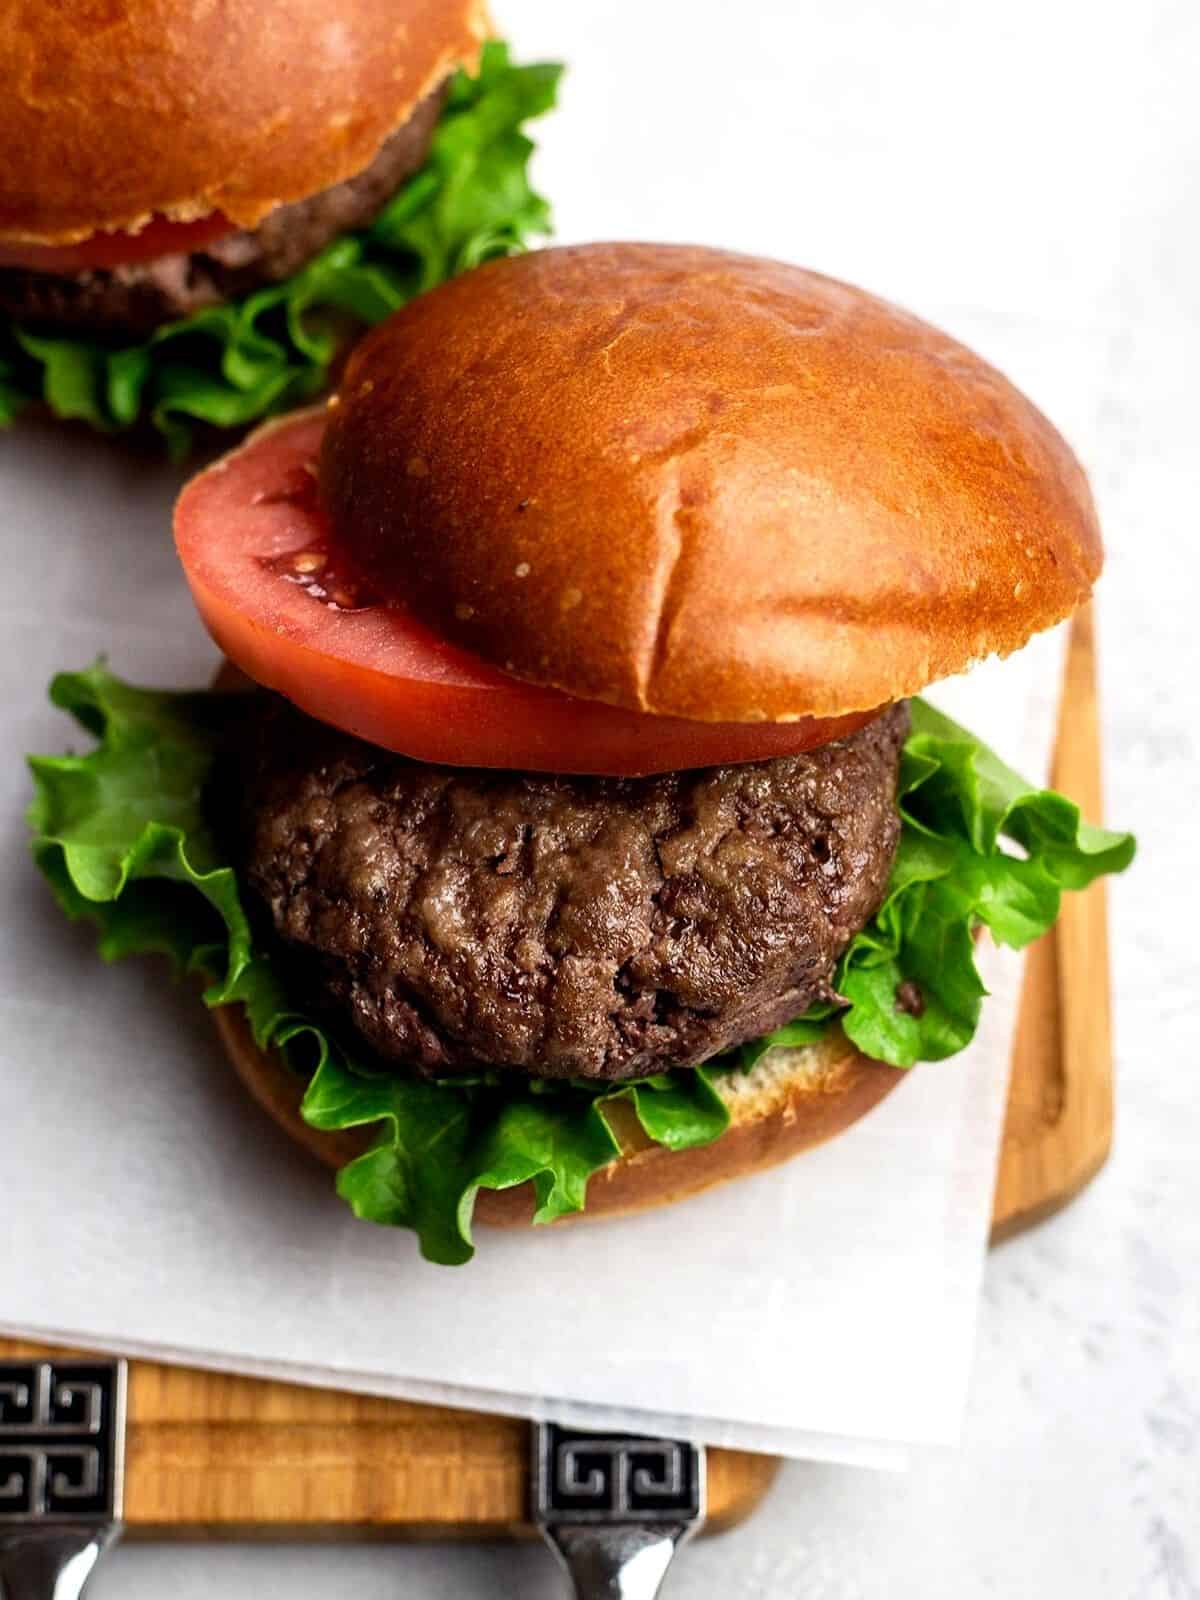 Burger with a bun, lettuce and tomato.